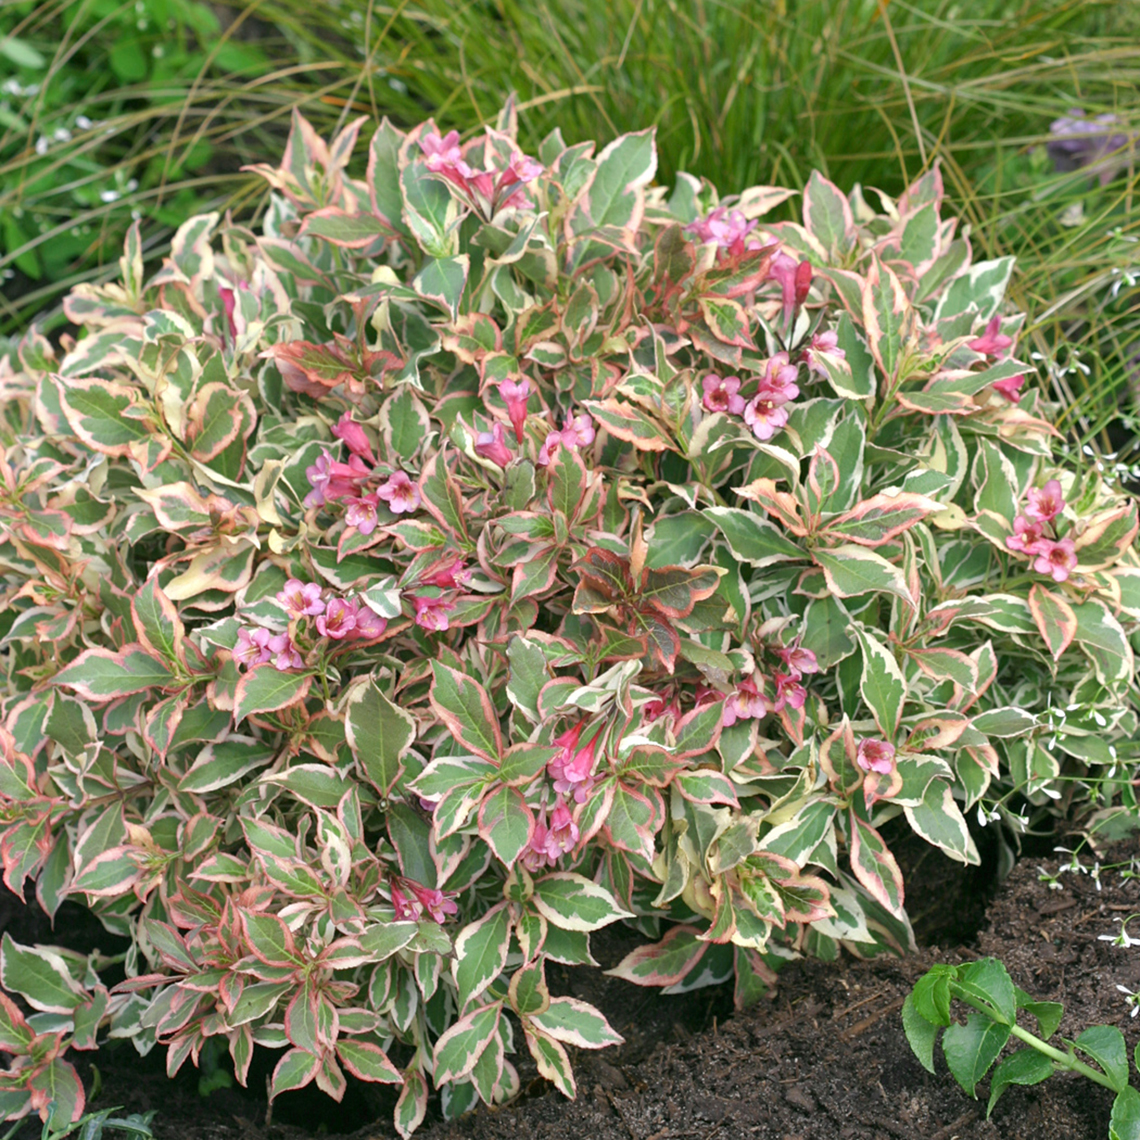 My Monet weigela has green white and pink variegated foliage and a very neat dwarf mounded habit